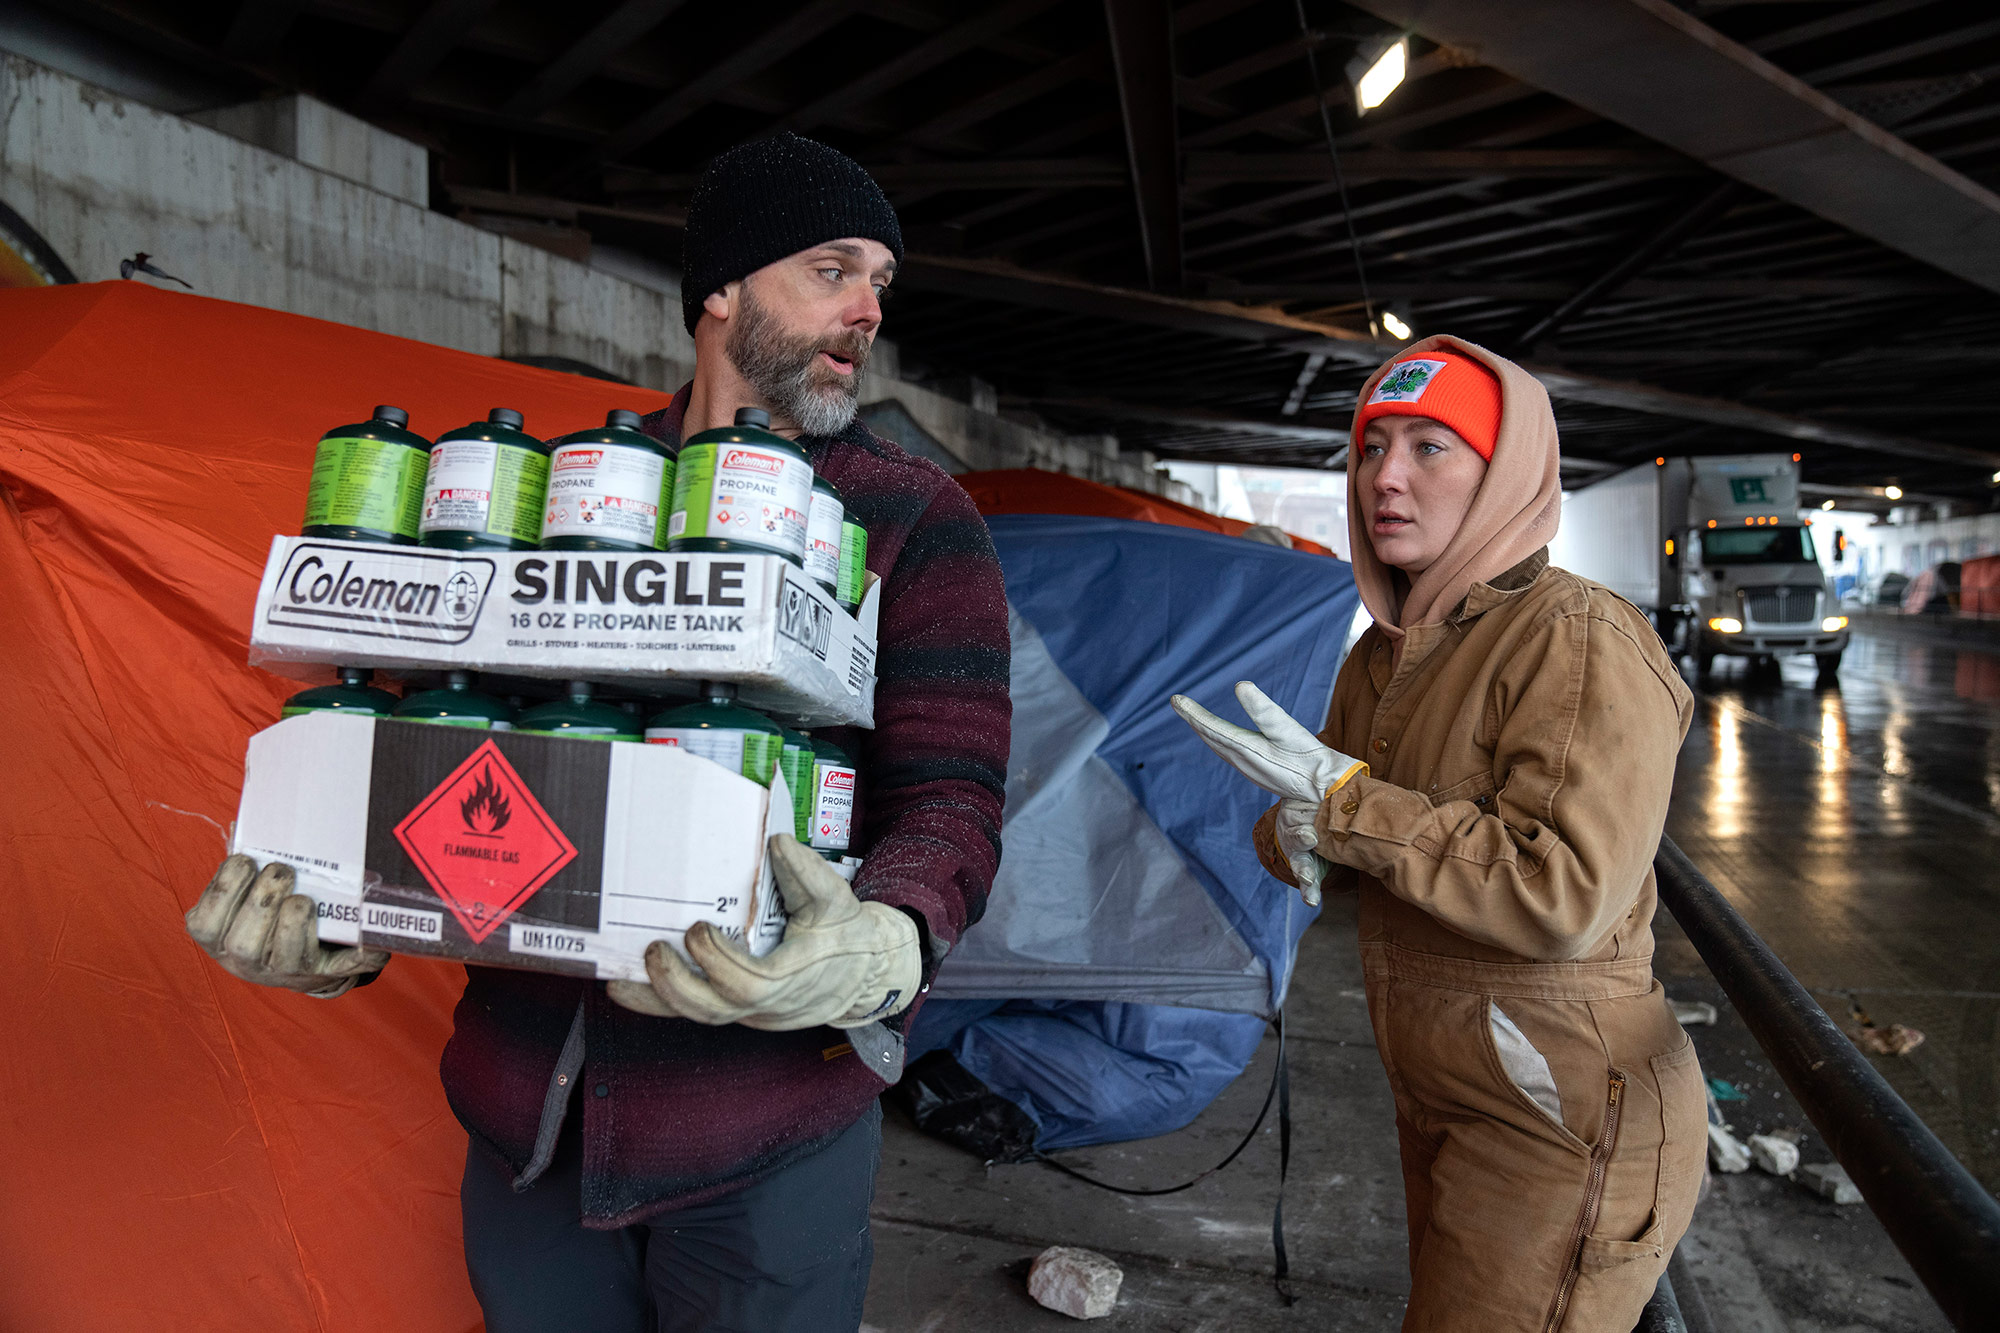 Volunteers deliver propane for portable heaters to homeless people in Chicago, on December 22. 